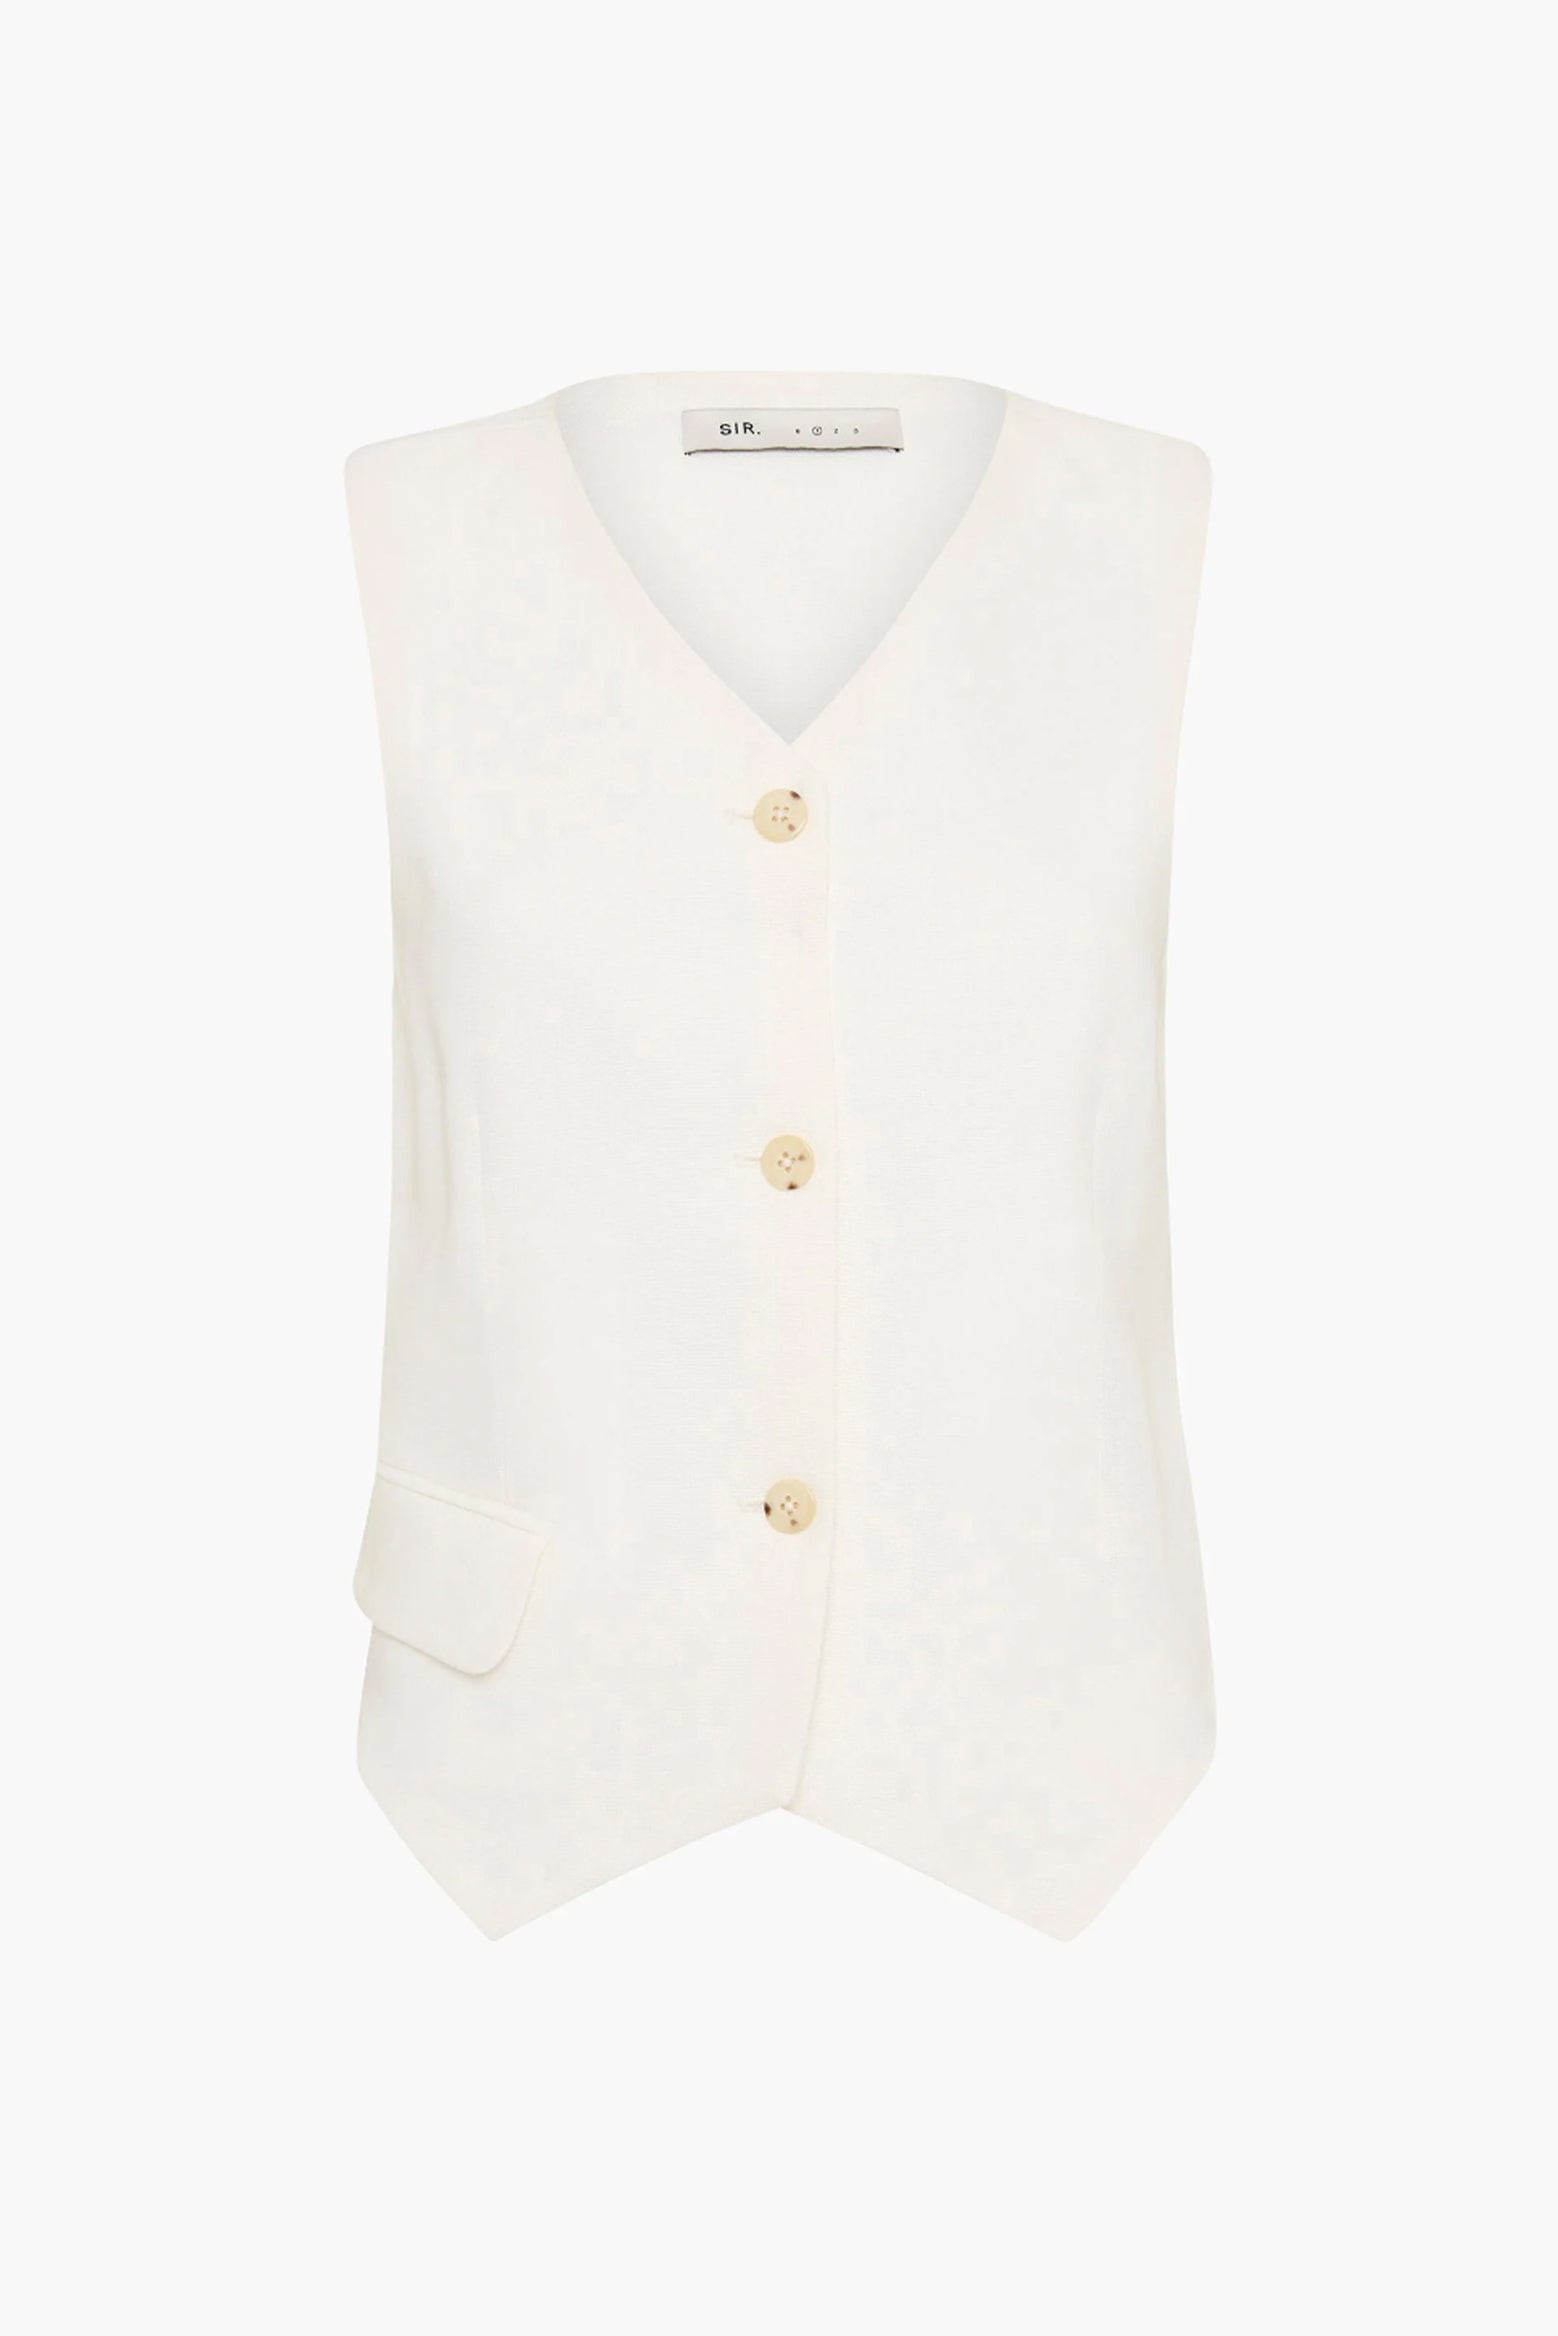 SIR Clemence Tailored Vest in Ivory available at TNT The New Trend Australia. 